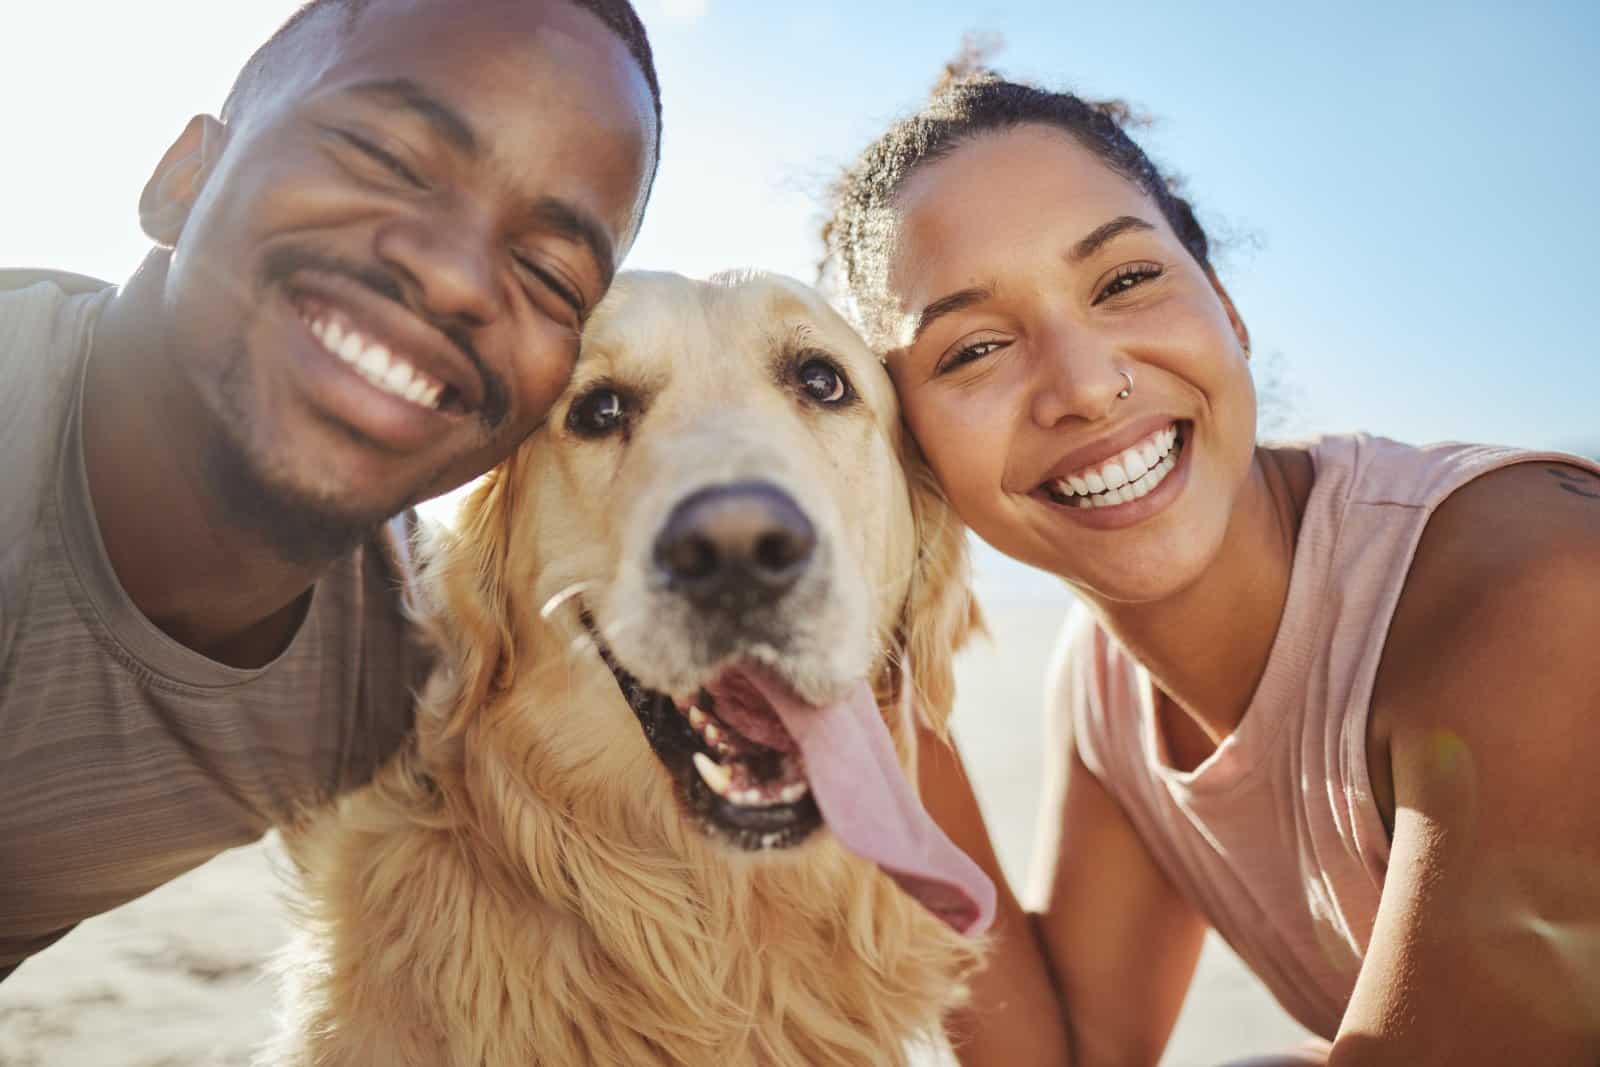 <p><span>Traveling with your pet enriches your journey with companionship and shared experiences. It requires careful planning and consideration for your pet’s needs, but the rewards are immense. As you explore new destinations with your furry friend by your side, you’ll create unforgettable memories and deepen your bond.</span></p> <p><span>Remember to prioritize your pet’s comfort and safety and embrace the adventure of discovering the world together. Your travels with your pet allow you to see new places in a way that brings joy and excitement to both of you.</span></p> <p><span>More Articles Like This…</span></p> <p><a href="https://thegreenvoyage.com/barcelona-discover-the-top-10-beach-clubs/"><span>Barcelona: Discover the Top 10 Beach Clubs</span></a></p> <p><a href="https://thegreenvoyage.com/top-destination-cities-to-visit/"><span>2024 Global City Travel Guide – Your Passport to the World’s Top Destination Cities</span></a></p> <p><a href="https://thegreenvoyage.com/exploring-khao-yai-a-hidden-gem-of-thailand/"><span>Exploring Khao Yai 2024 – A Hidden Gem of Thailand</span></a></p> <p><span>The post <a href="https://passingthru.com/tips-when-traveling-with-your-pets/">10 Must-Know Tips When Traveling With Your Pets</a> republished on </span><a href="https://passingthru.com/"><span>Passing Thru</span></a><span> with permission from </span><a href="https://thegreenvoyage.com/"><span>The Green Voyage</span></a><span>.</span></p> <p><span>Featured Image Credit: Shutterstock / GFXShani.</span></p> <p><span>For transparency, this content was partly developed with AI assistance and carefully curated by an experienced editor to be informative and ensure accuracy.</span></p>